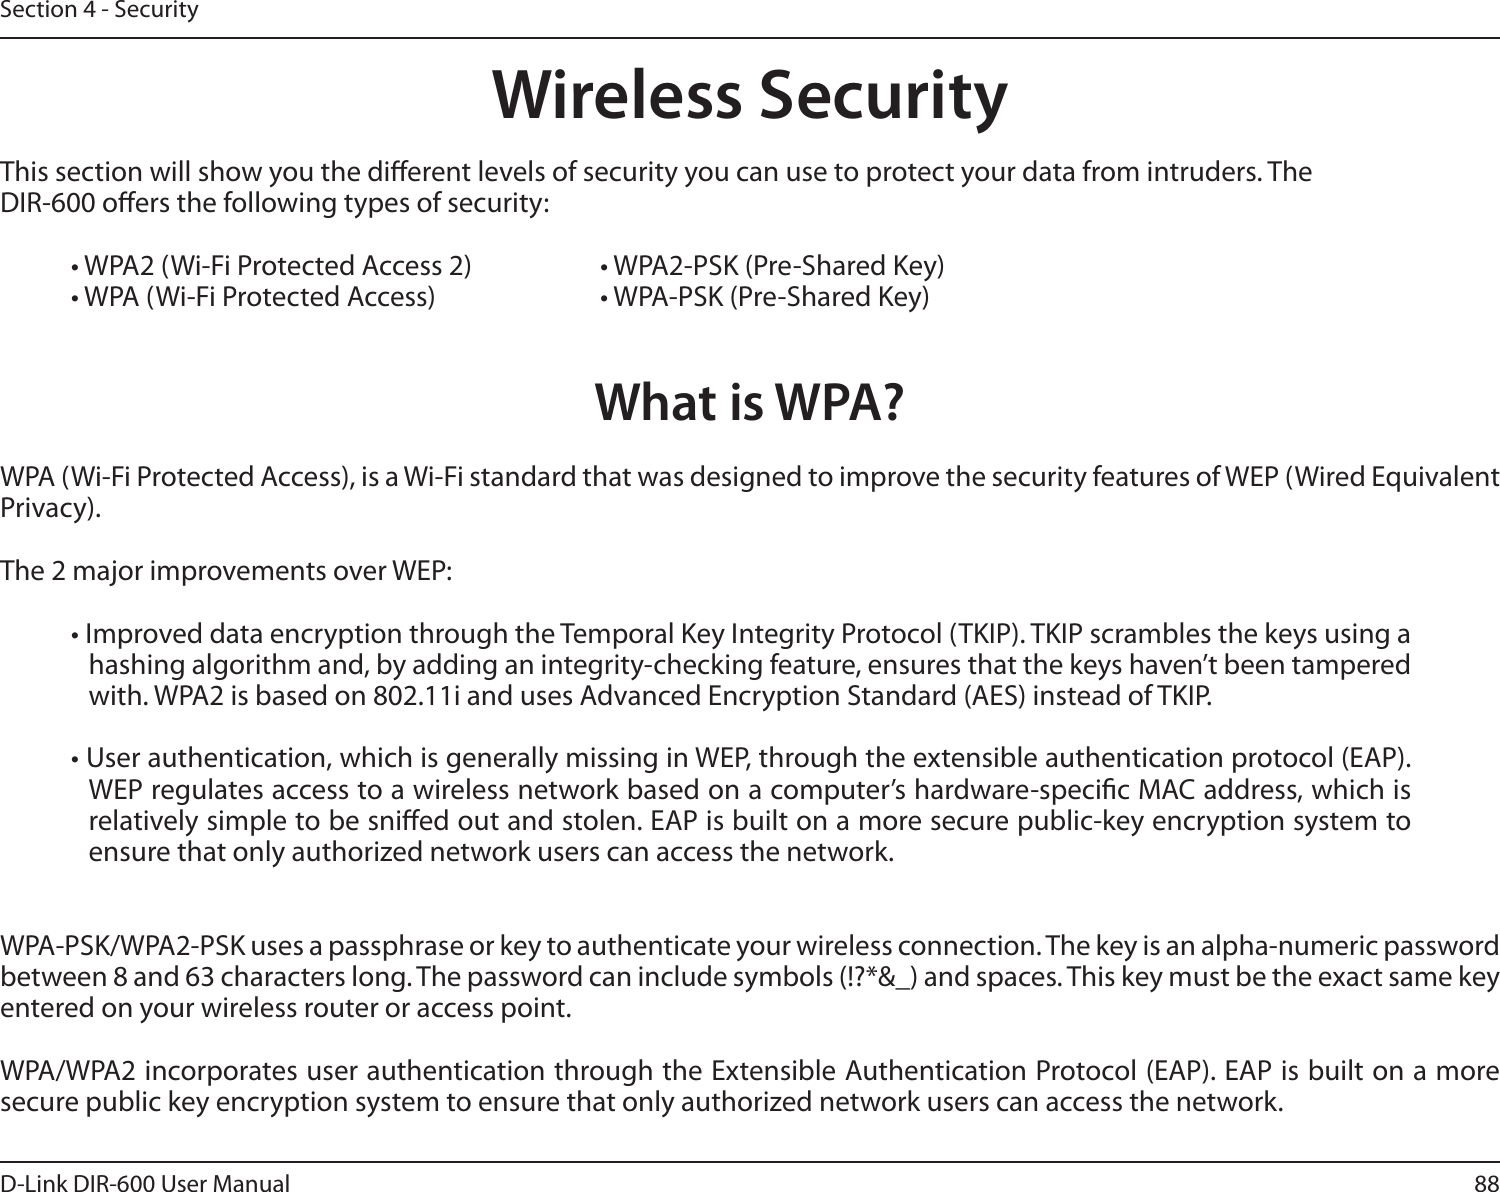 88D-Link DIR-600 User ManualSection 4 - SecurityWireless SecurityThis section will show you the dierent levels of security you can use to protect your data from intruders. The DIR-600 oers the following types of security:• WPA2 (Wi-Fi Protected Access 2)     • WPA2-PSK (Pre-Shared Key)• WPA (Wi-Fi Protected Access)      • WPA-PSK (Pre-Shared Key)What is WPA?WPA (Wi-Fi Protected Access), is a Wi-Fi standard that was designed to improve the security features of WEP (Wired Equivalent Privacy).  The 2 major improvements over WEP: • Improved data encryption through the Temporal Key Integrity Protocol (TKIP). TKIP scrambles the keys using a hashing algorithm and, by adding an integrity-checking feature, ensures that the keys haven’t been tampered with. WPA2 is based on 802.11i and uses Advanced Encryption Standard (AES) instead of TKIP.• User authentication, which is generally missing in WEP, through the extensible authentication protocol (EAP). WEP regulates access to a wireless network based on a computer’s hardware-specic MAC address, which is relatively simple to be snied out and stolen. EAP is built on a more secure public-key encryption system to ensure that only authorized network users can access the network.WPA-PSK/WPA2-PSK uses a passphrase or key to authenticate your wireless connection. The key is an alpha-numeric password between 8 and 63 characters long. The password can include symbols (!?*&amp;_) and spaces. This key must be the exact same key entered on your wireless router or access point.WPA/WPA2 incorporates user authentication through the Extensible Authentication Protocol (EAP). EAP is built on a more secure public key encryption system to ensure that only authorized network users can access the network.